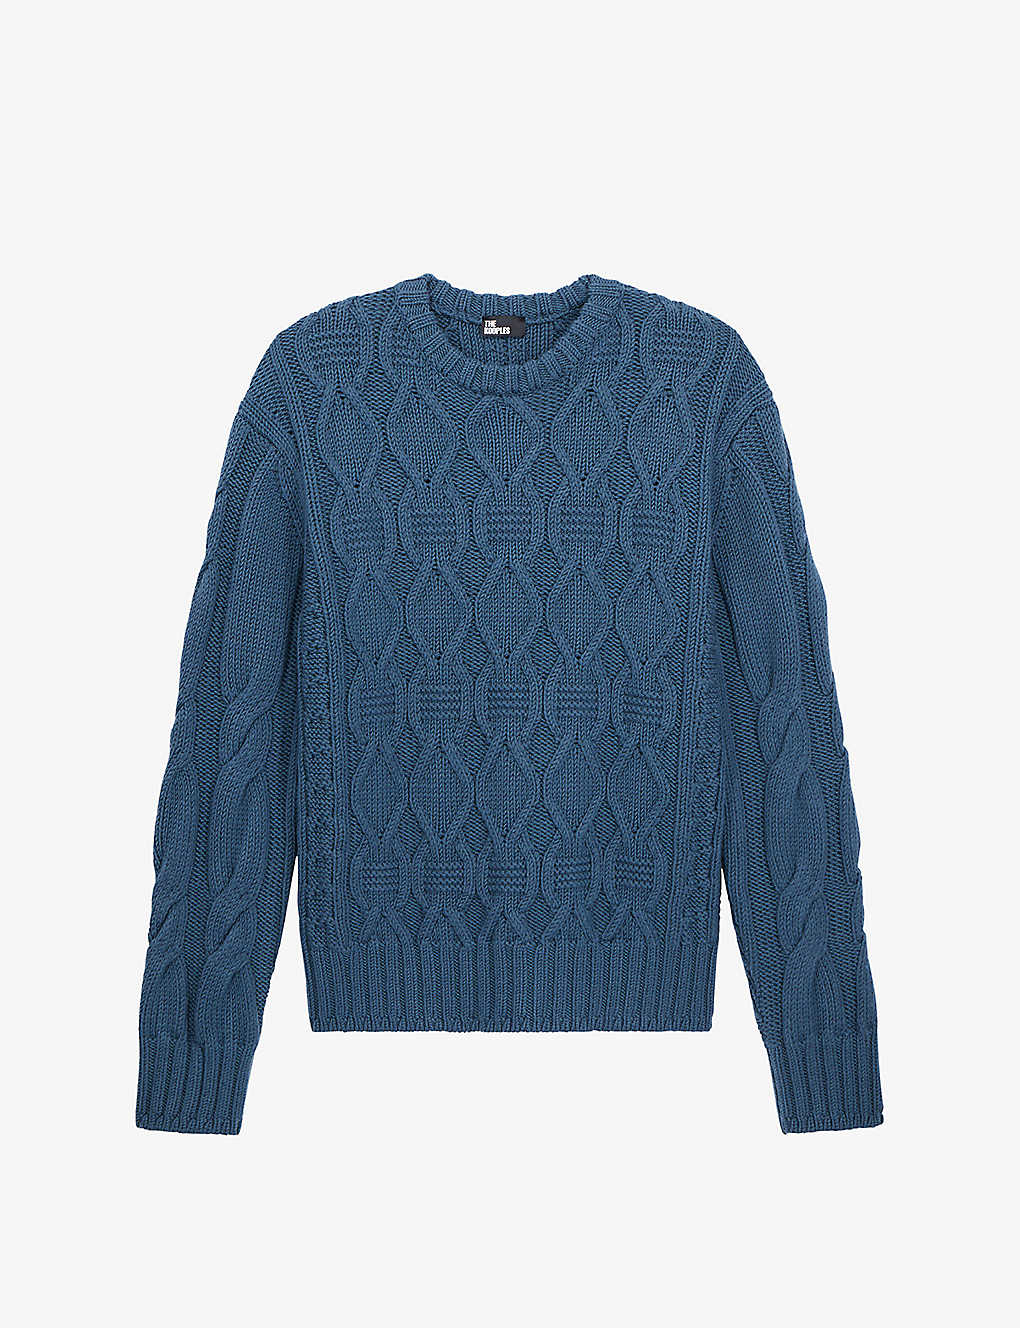 THE KOOPLES THE KOOPLES MENS BLUE PETROL RELAXED-FIT CABLE-KNITTED WOOL JUMPER